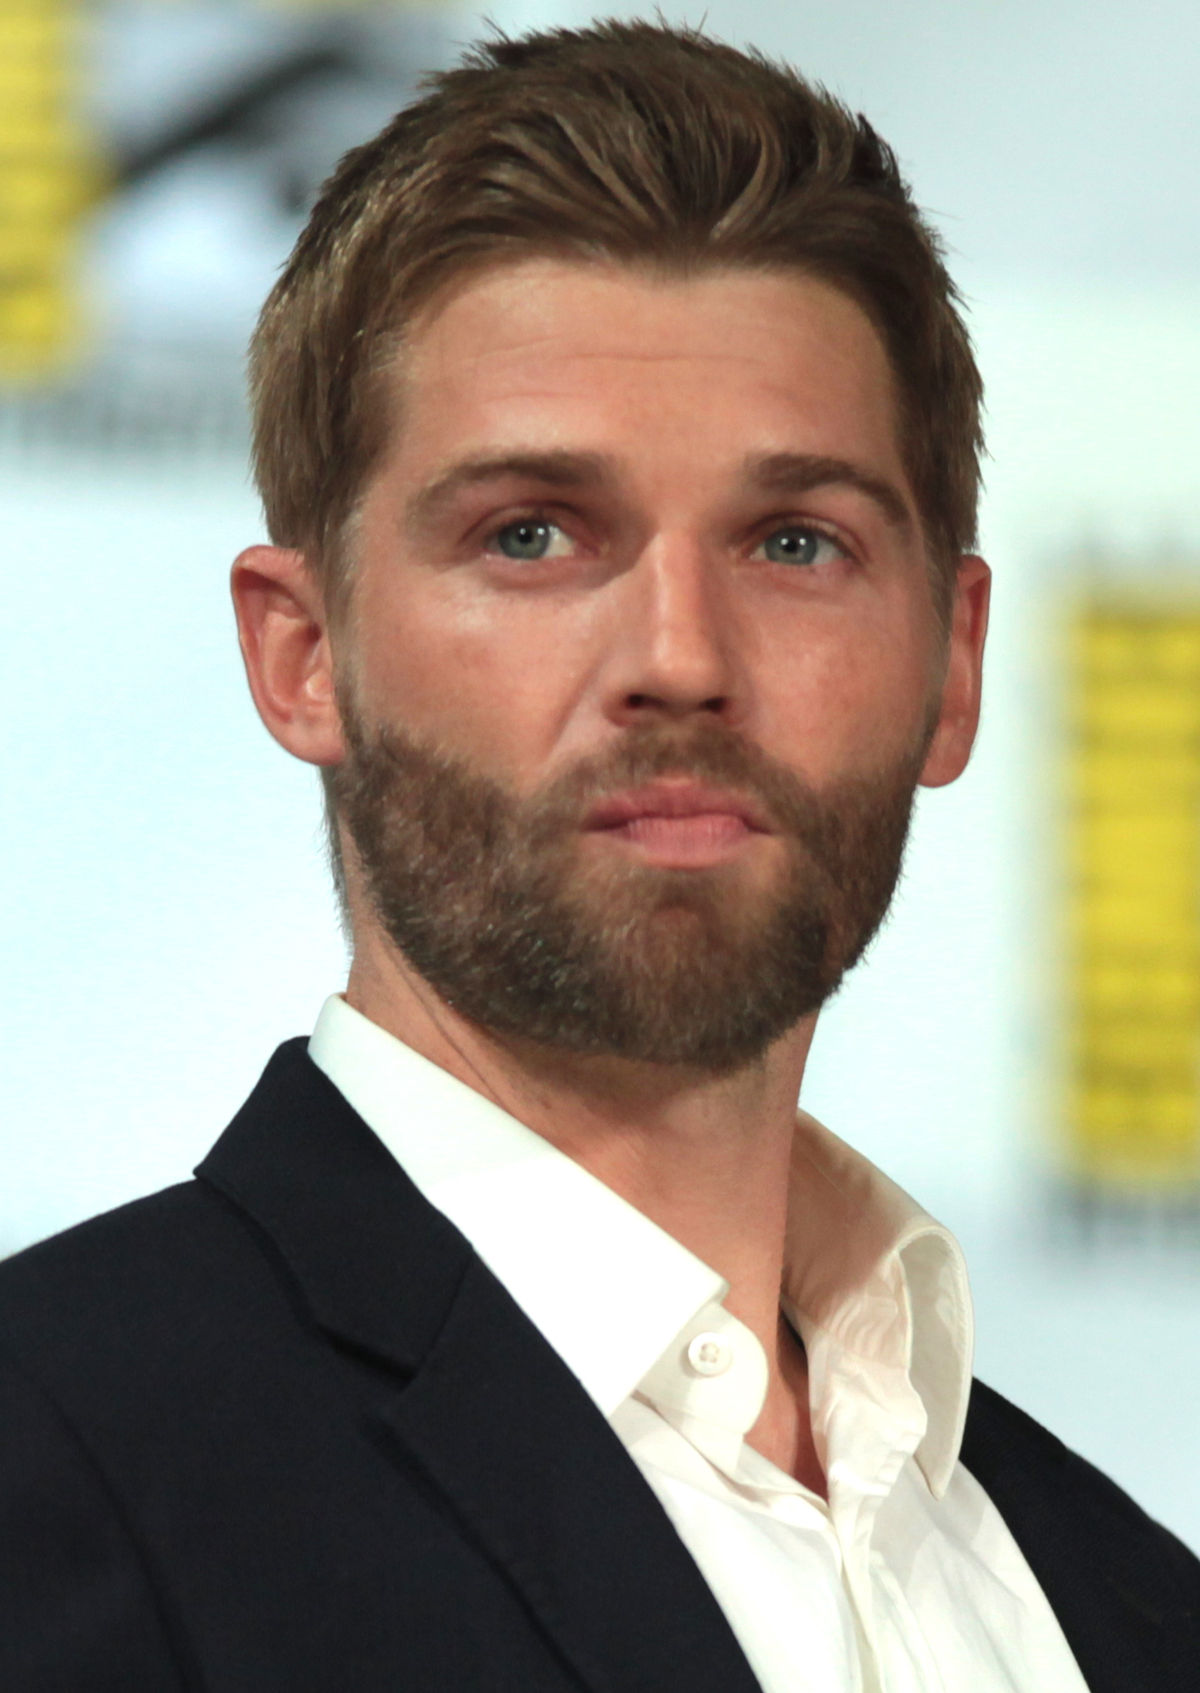 How tall is Mike Vogel?